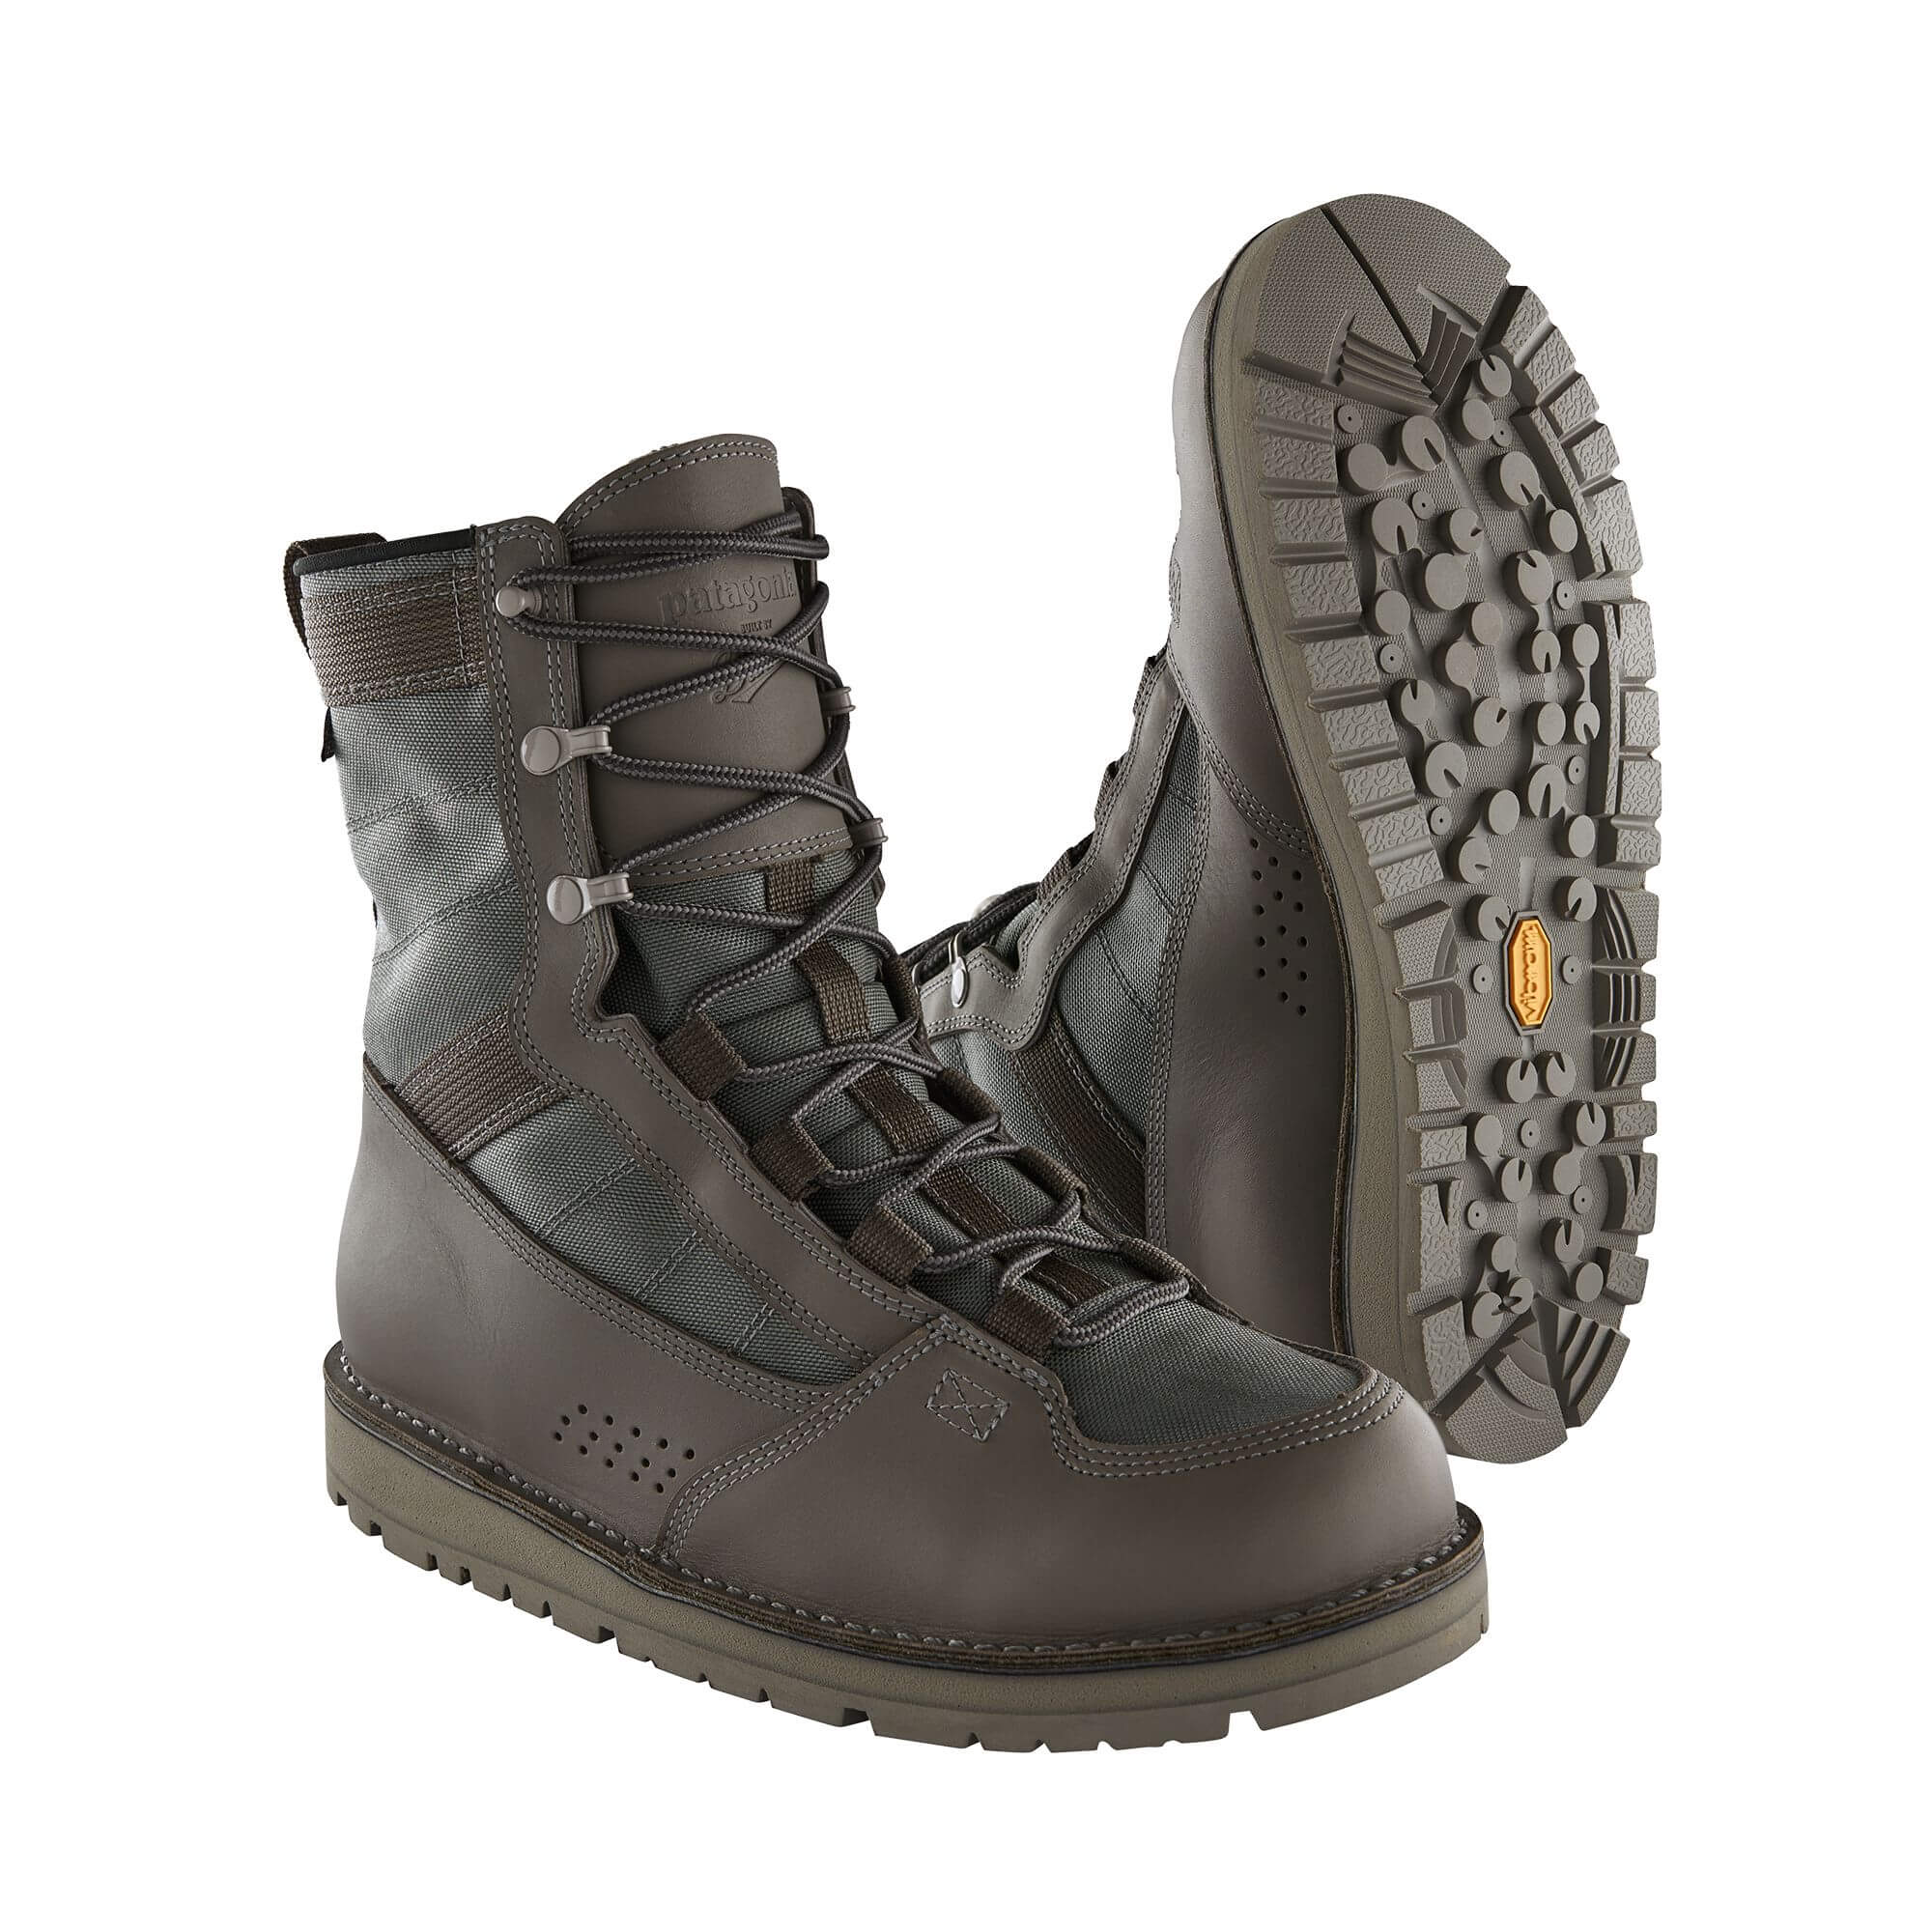 Patagonia River Salt Wading Boot (by Danner) - 11